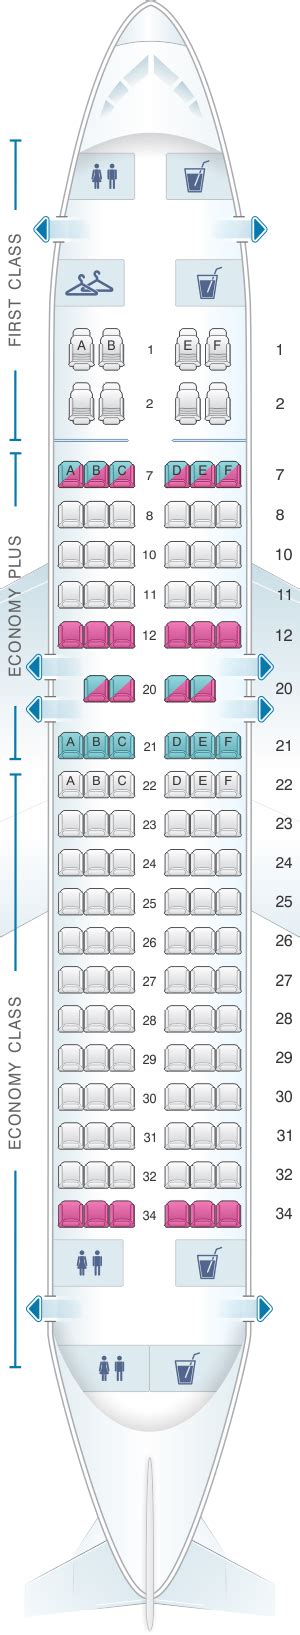 Seat Map United Airlines Airbus A319 Version 1